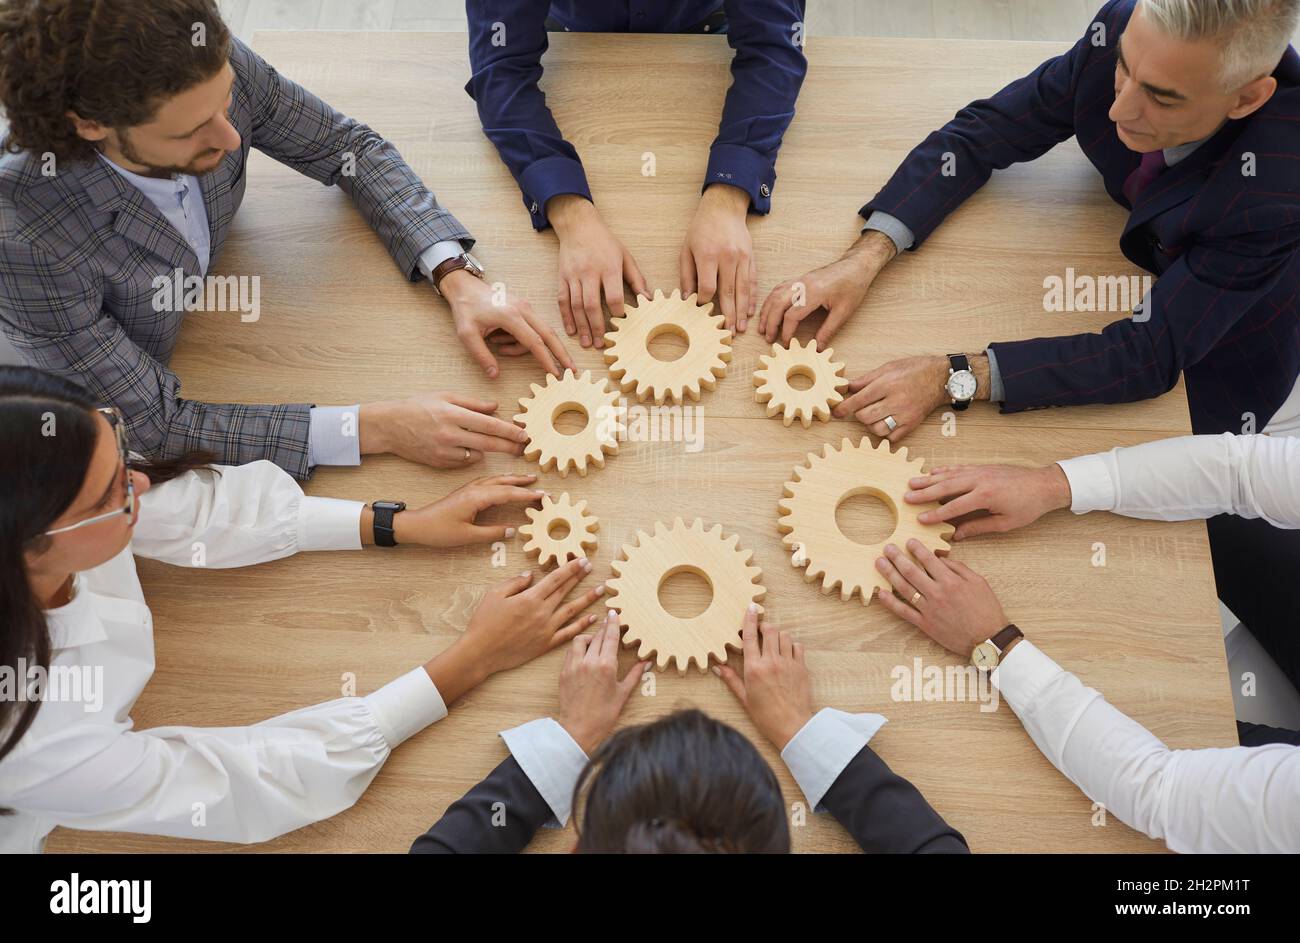 Team of business people connecting gearwheels illustrating the concept of teamwork Stock Photo